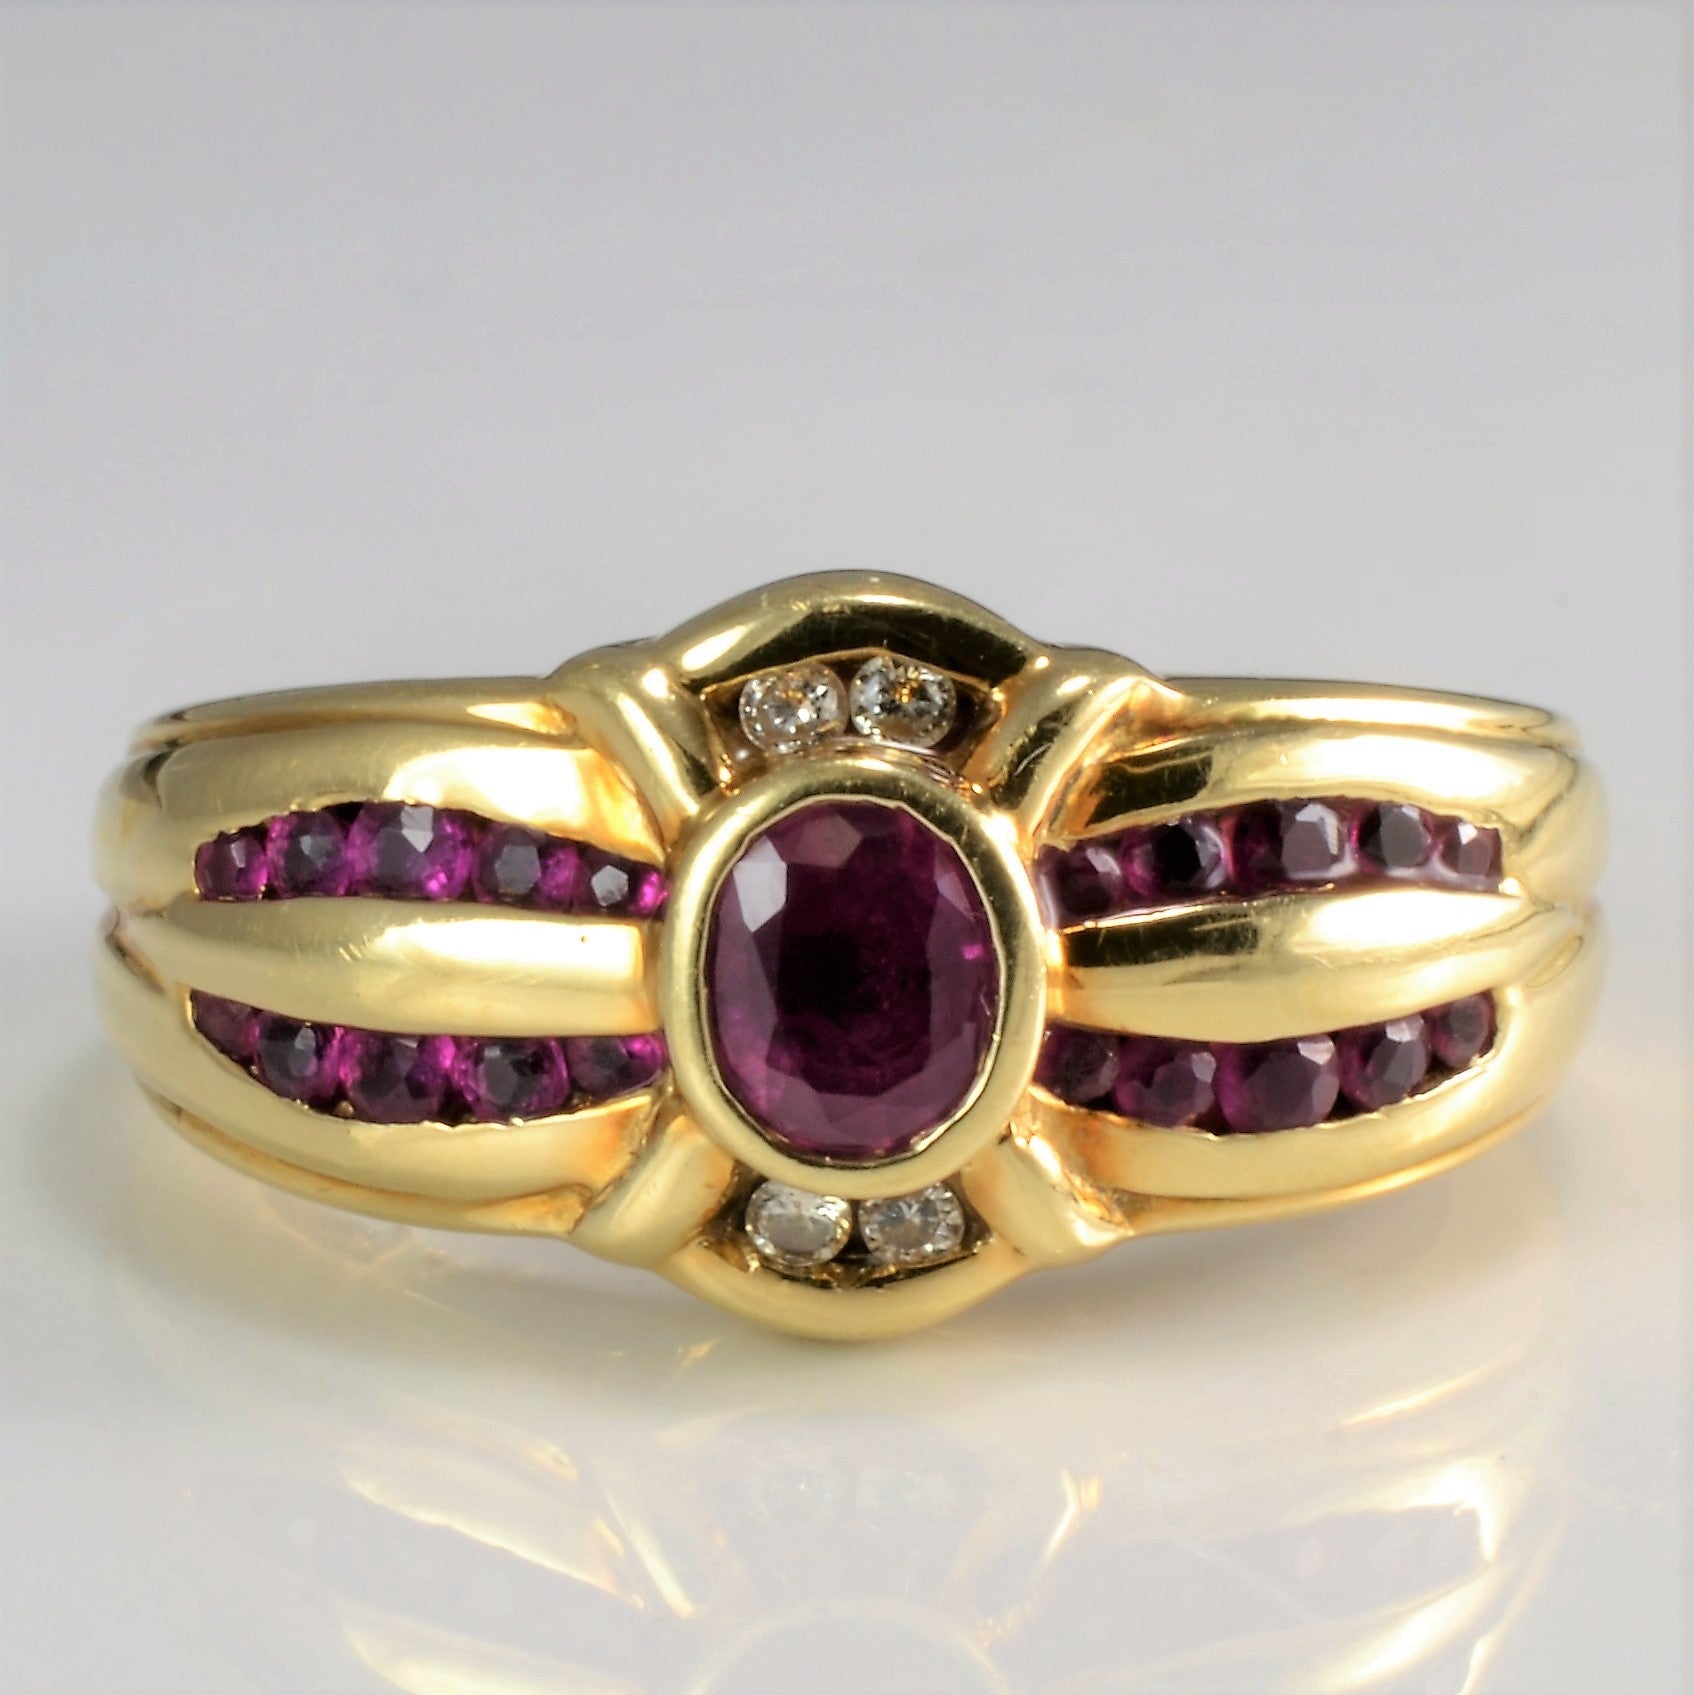 Channel Ruby & Diamond Ladies Cocktail Ring | 0.04 ctw, SZ 7 |